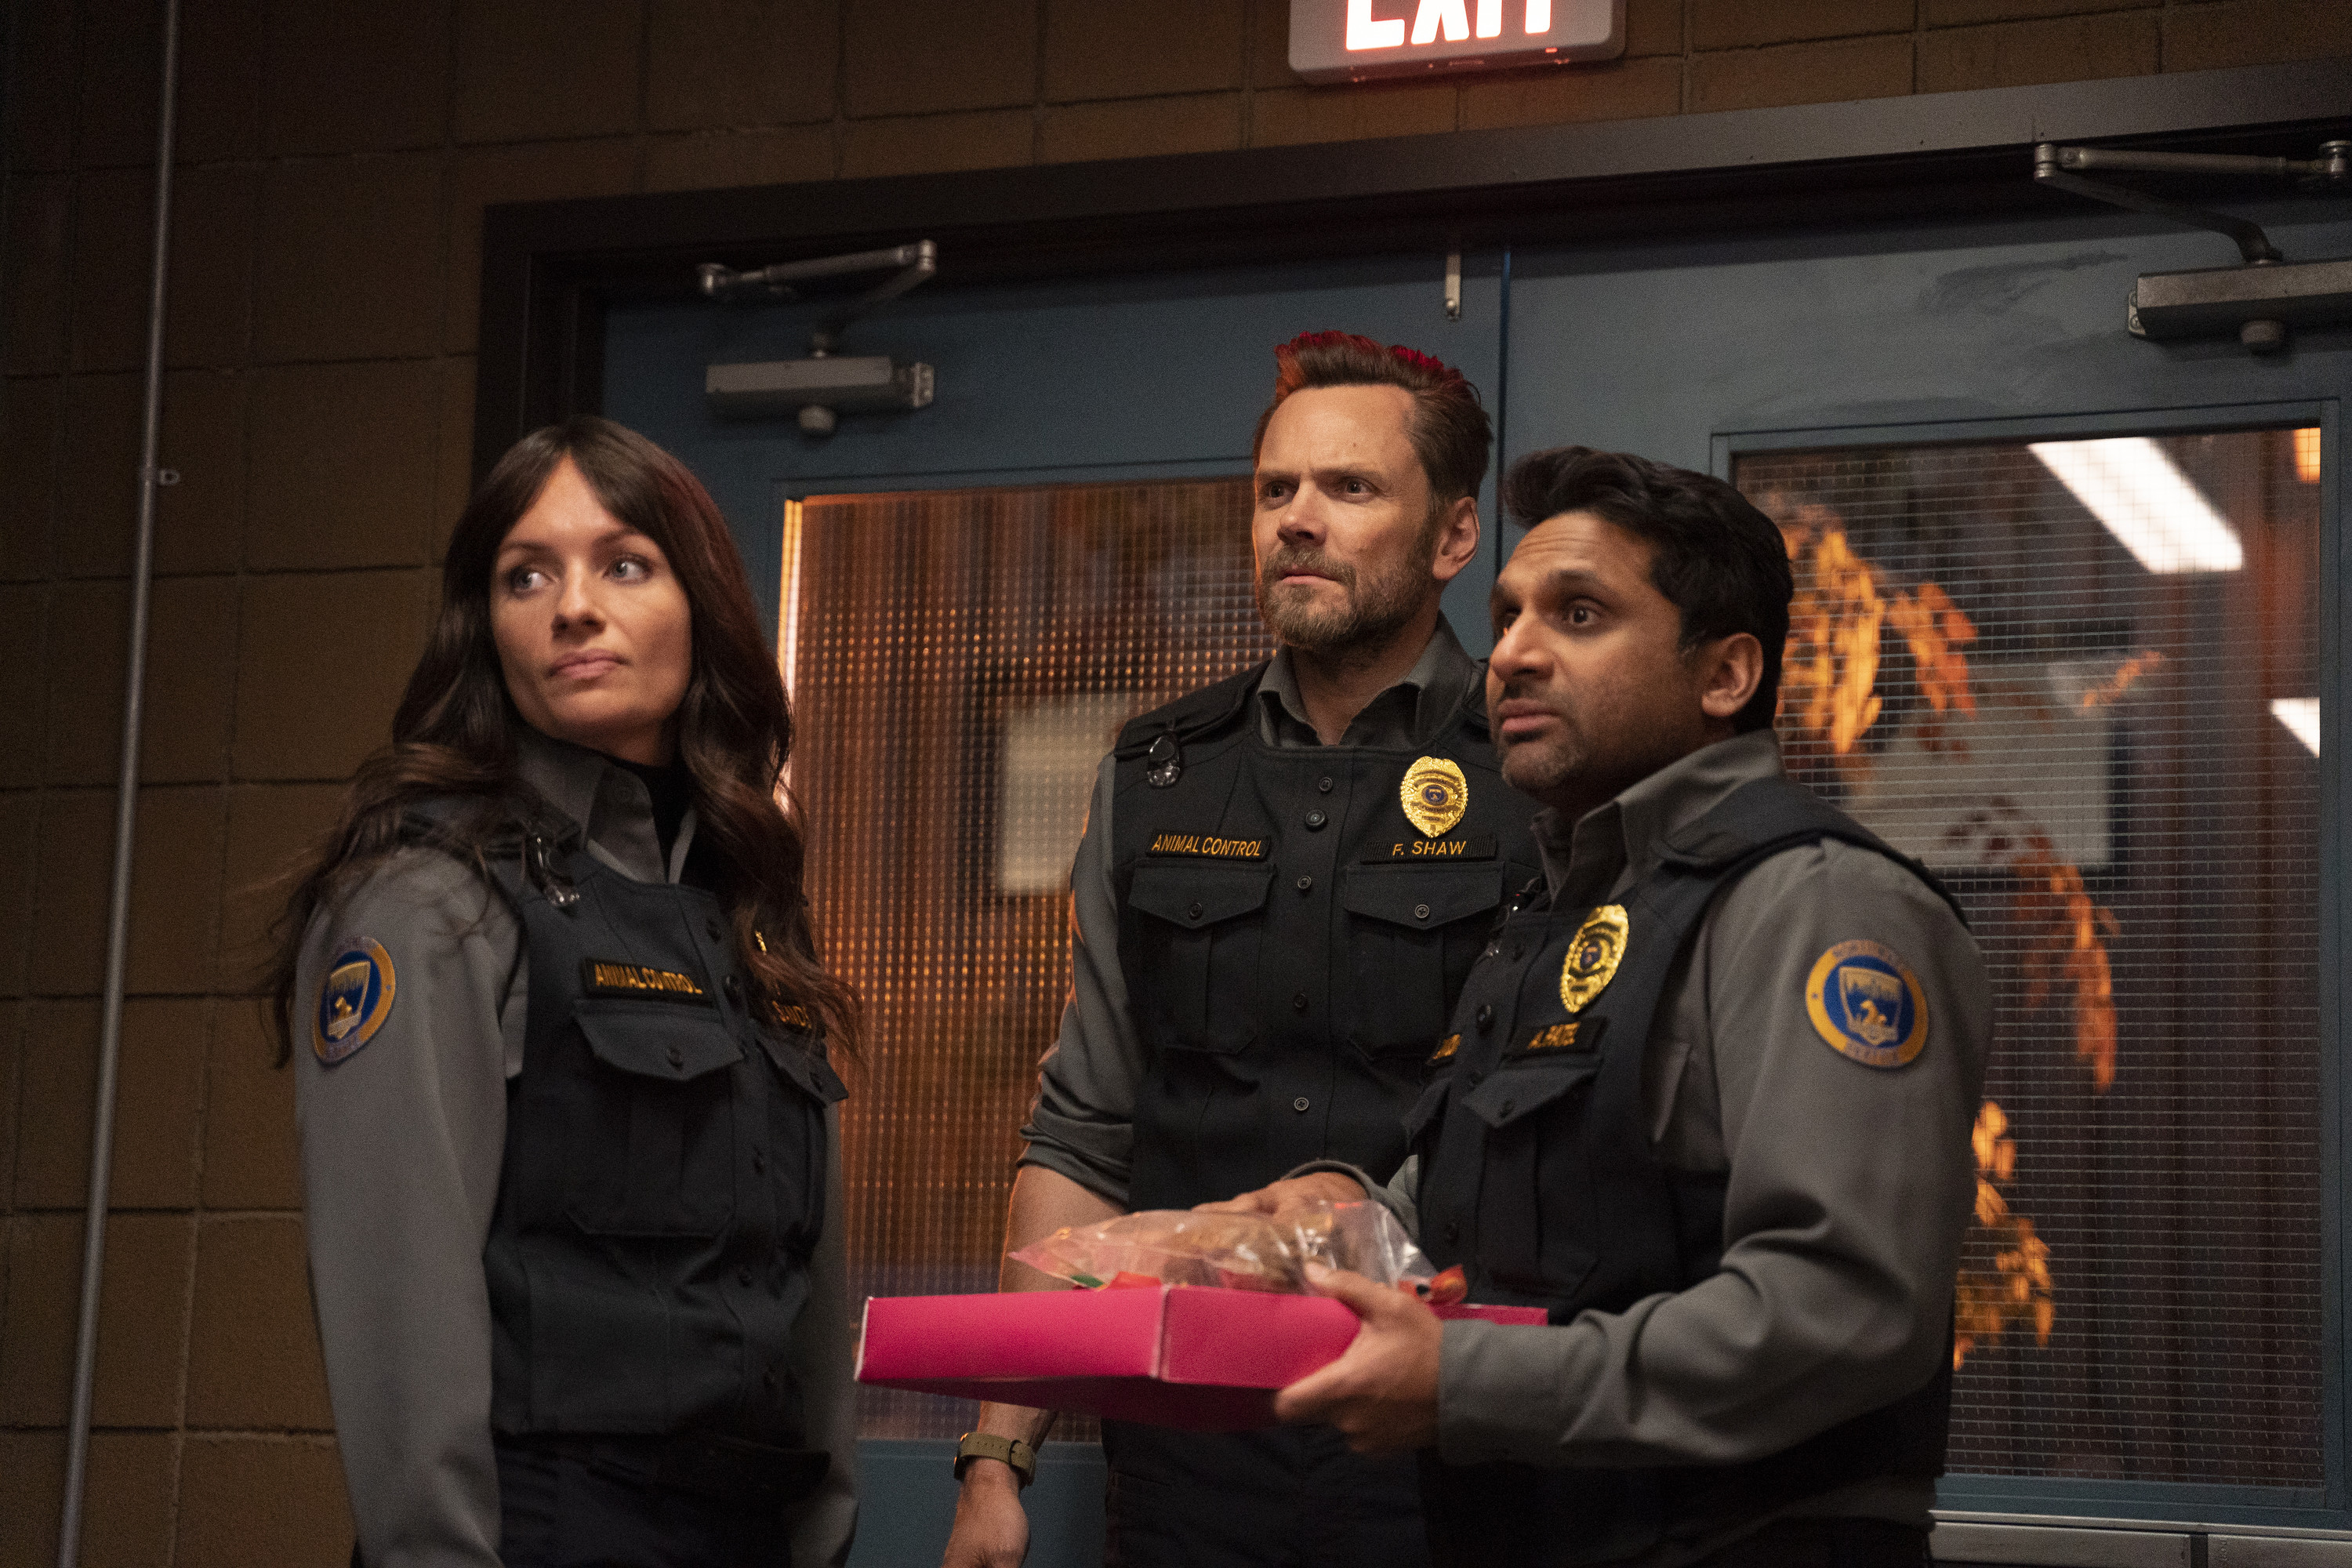 Animal Control's second season premiere will air on March 6